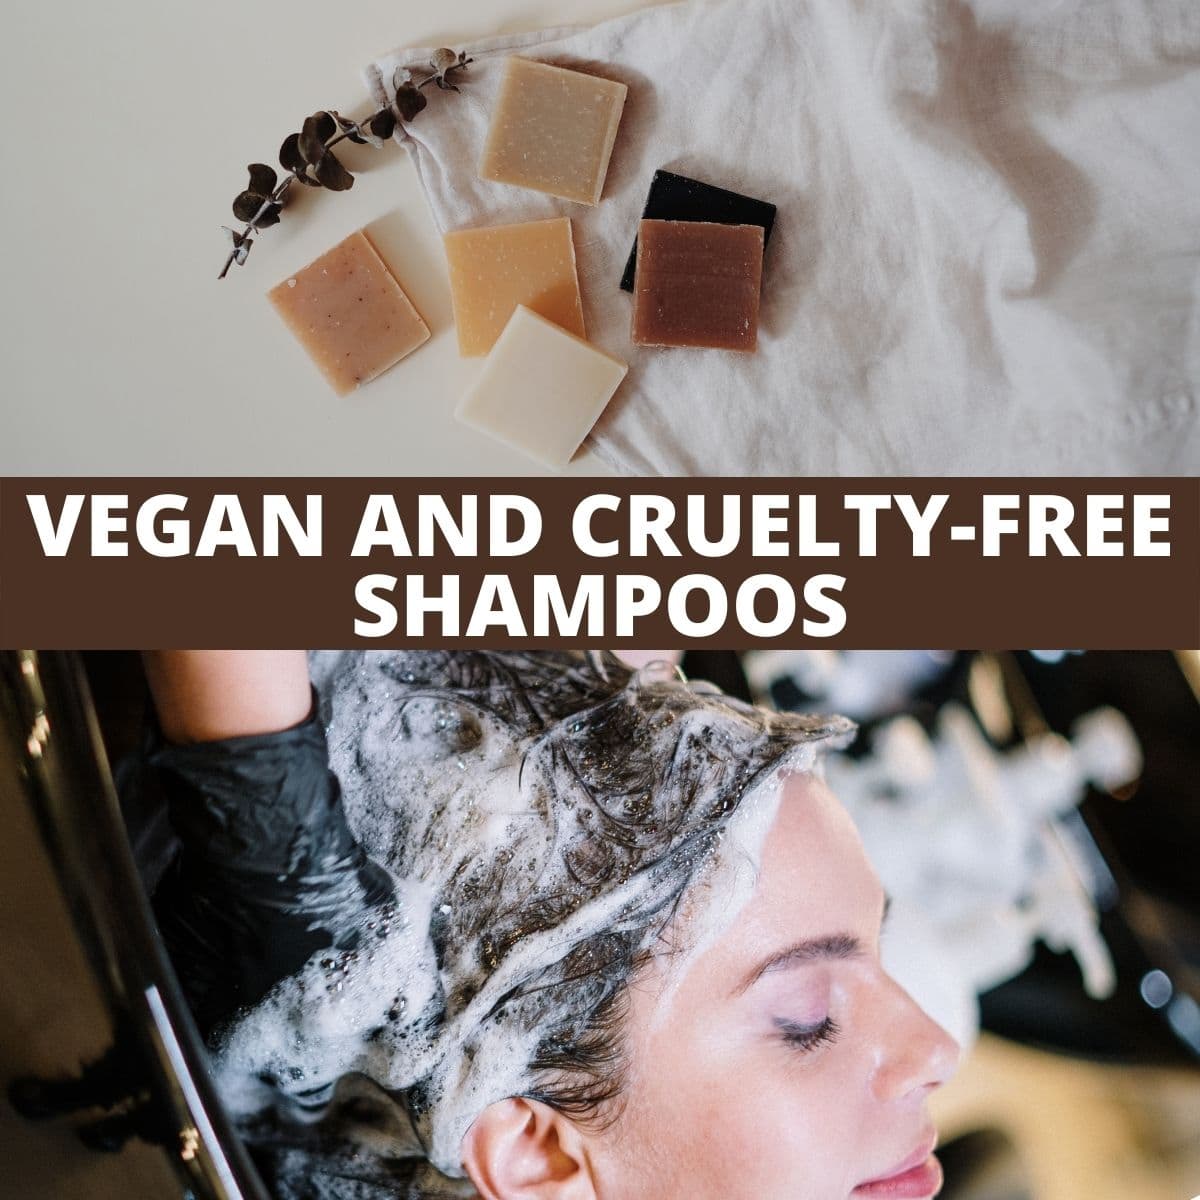 Shampoo bars and a woman with shampoo in her hair, with text that says: Vegan and Cruelty-Free Shampos